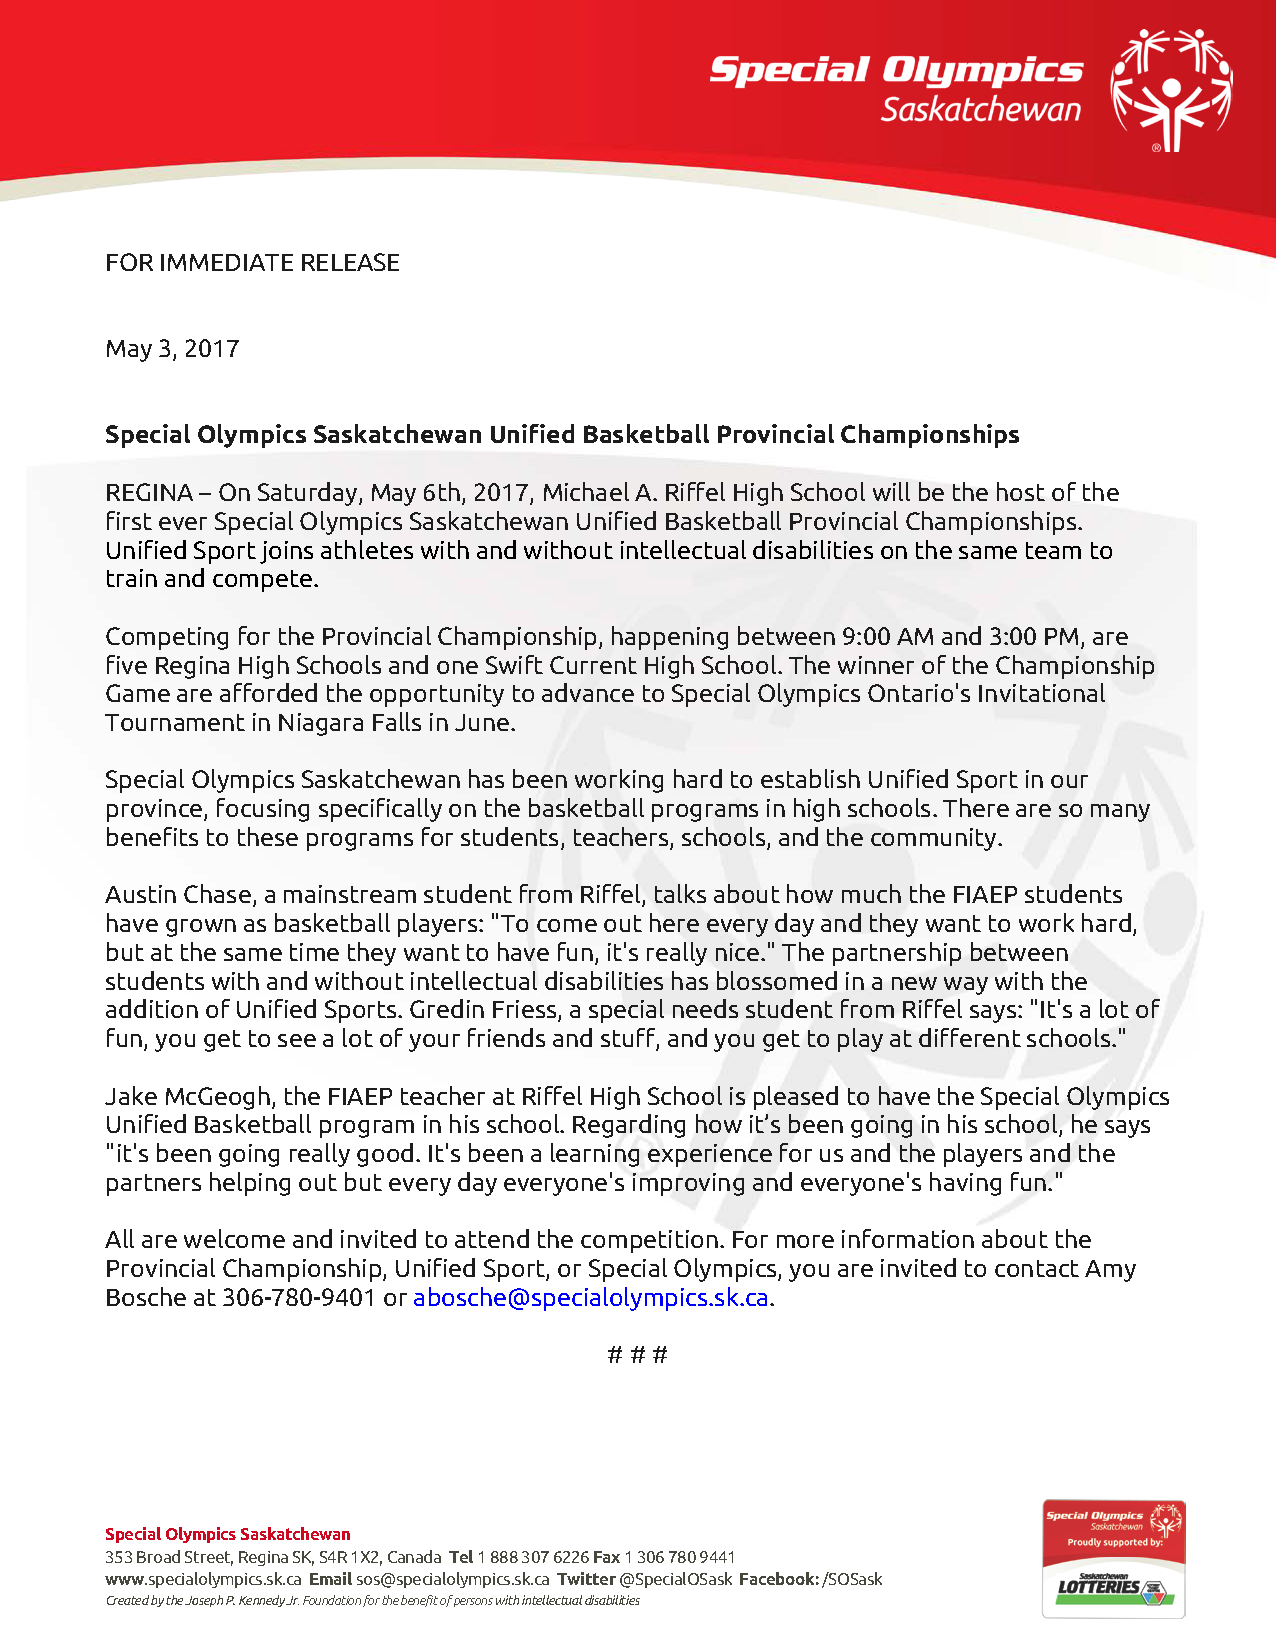 FOR IMMEDIATE RELEASE - Special Olympics Saskatchewan Unified Basketball Provincial Championships_Page_1